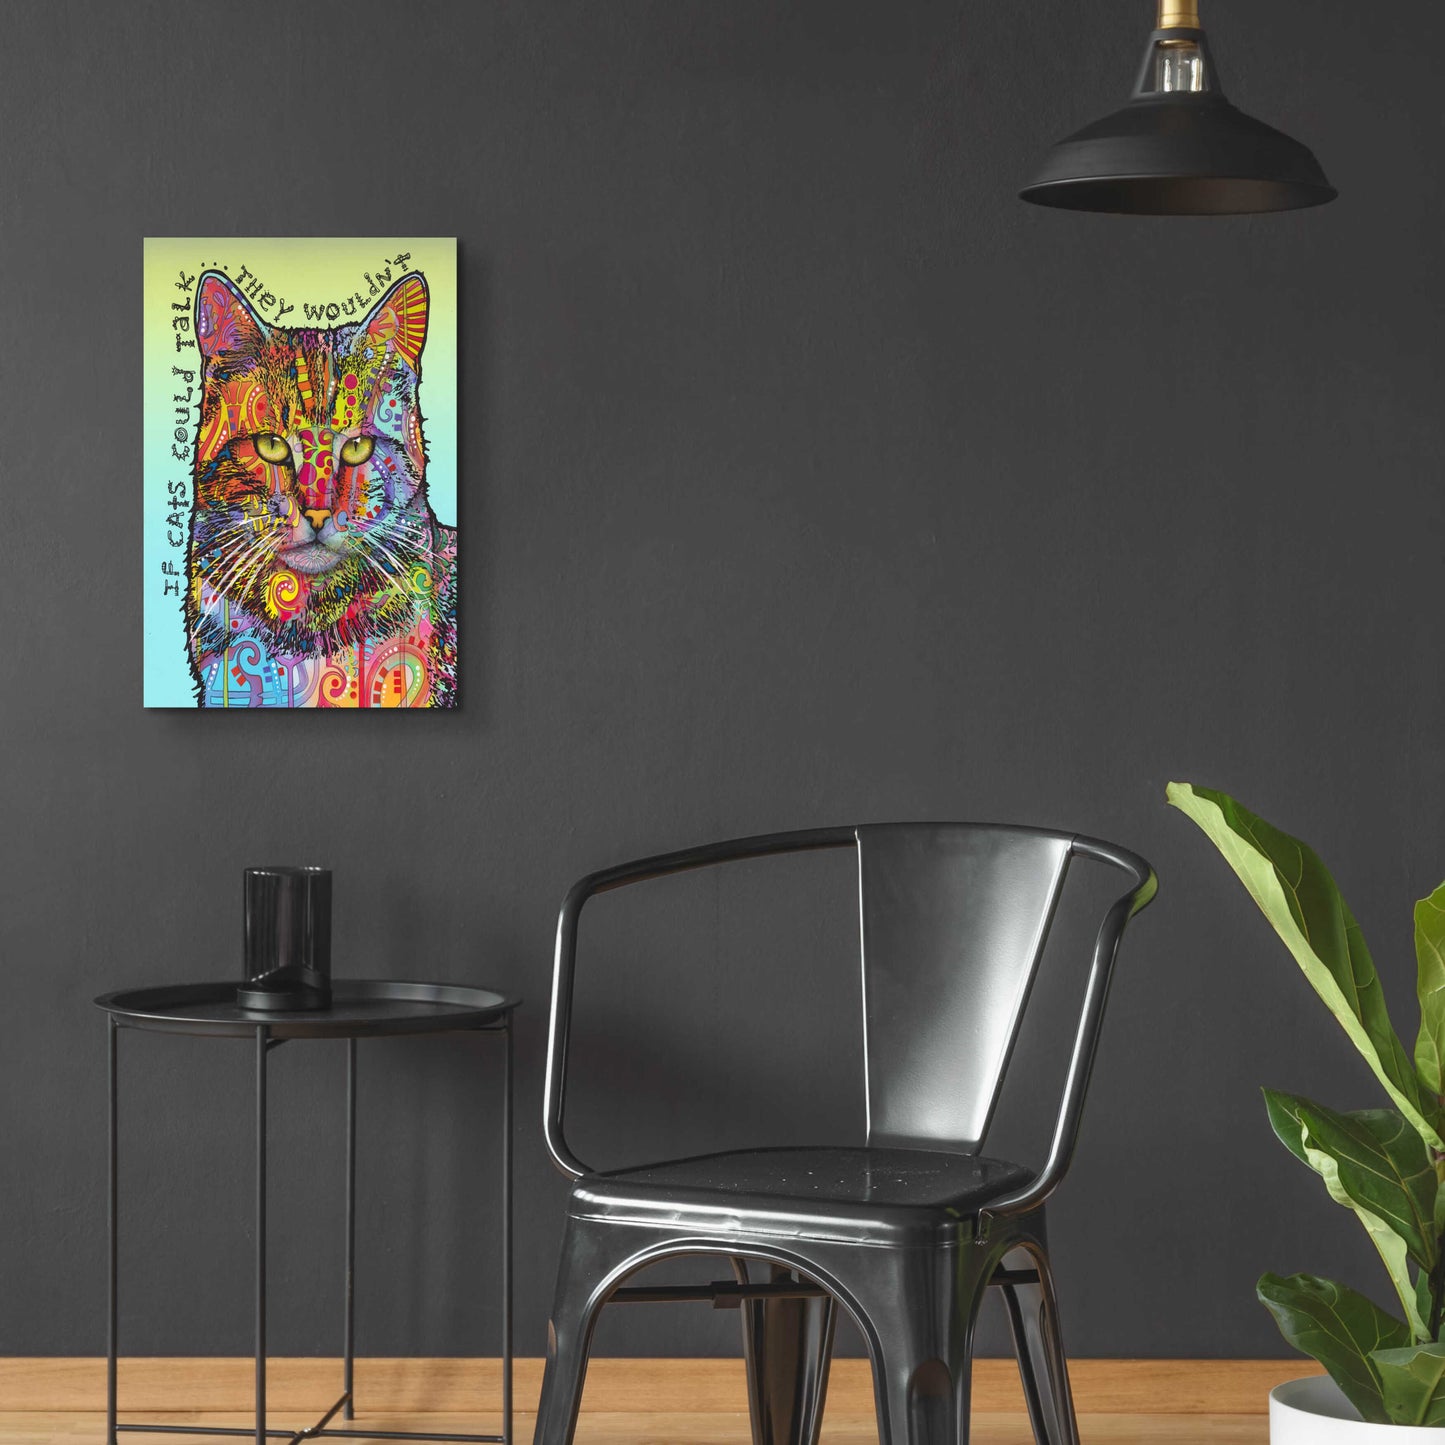 Epic Art 'If Cats Could Talk' by Dean Russo, Acrylic Glass Wall Art,16x24